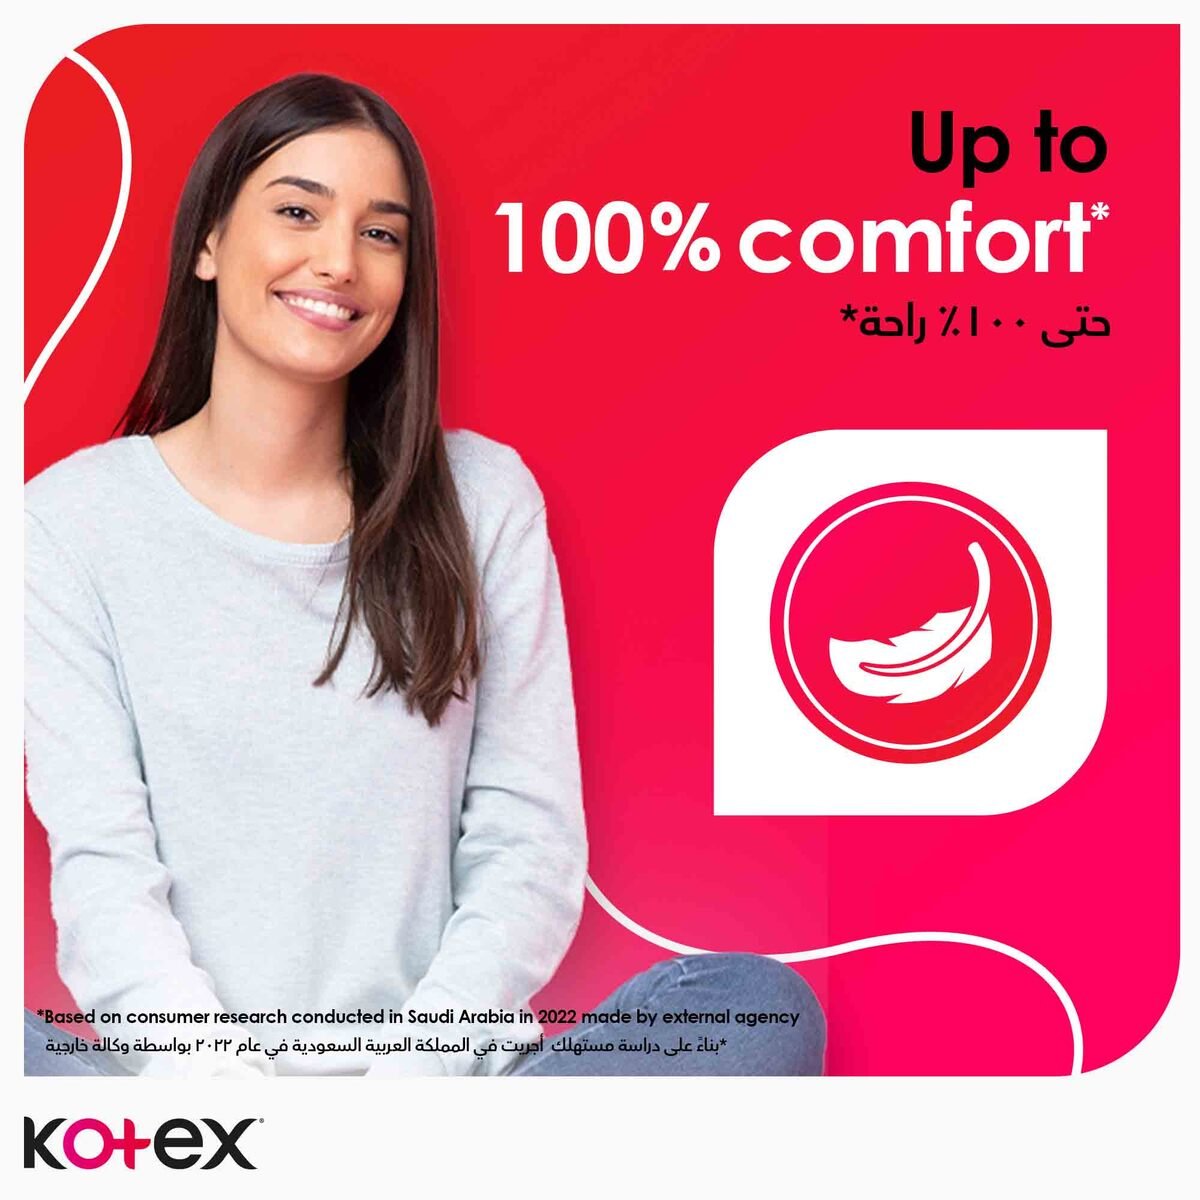 Kotex Maxi Protect Thick Super Size Sanitary Pads with Wings 10pcs